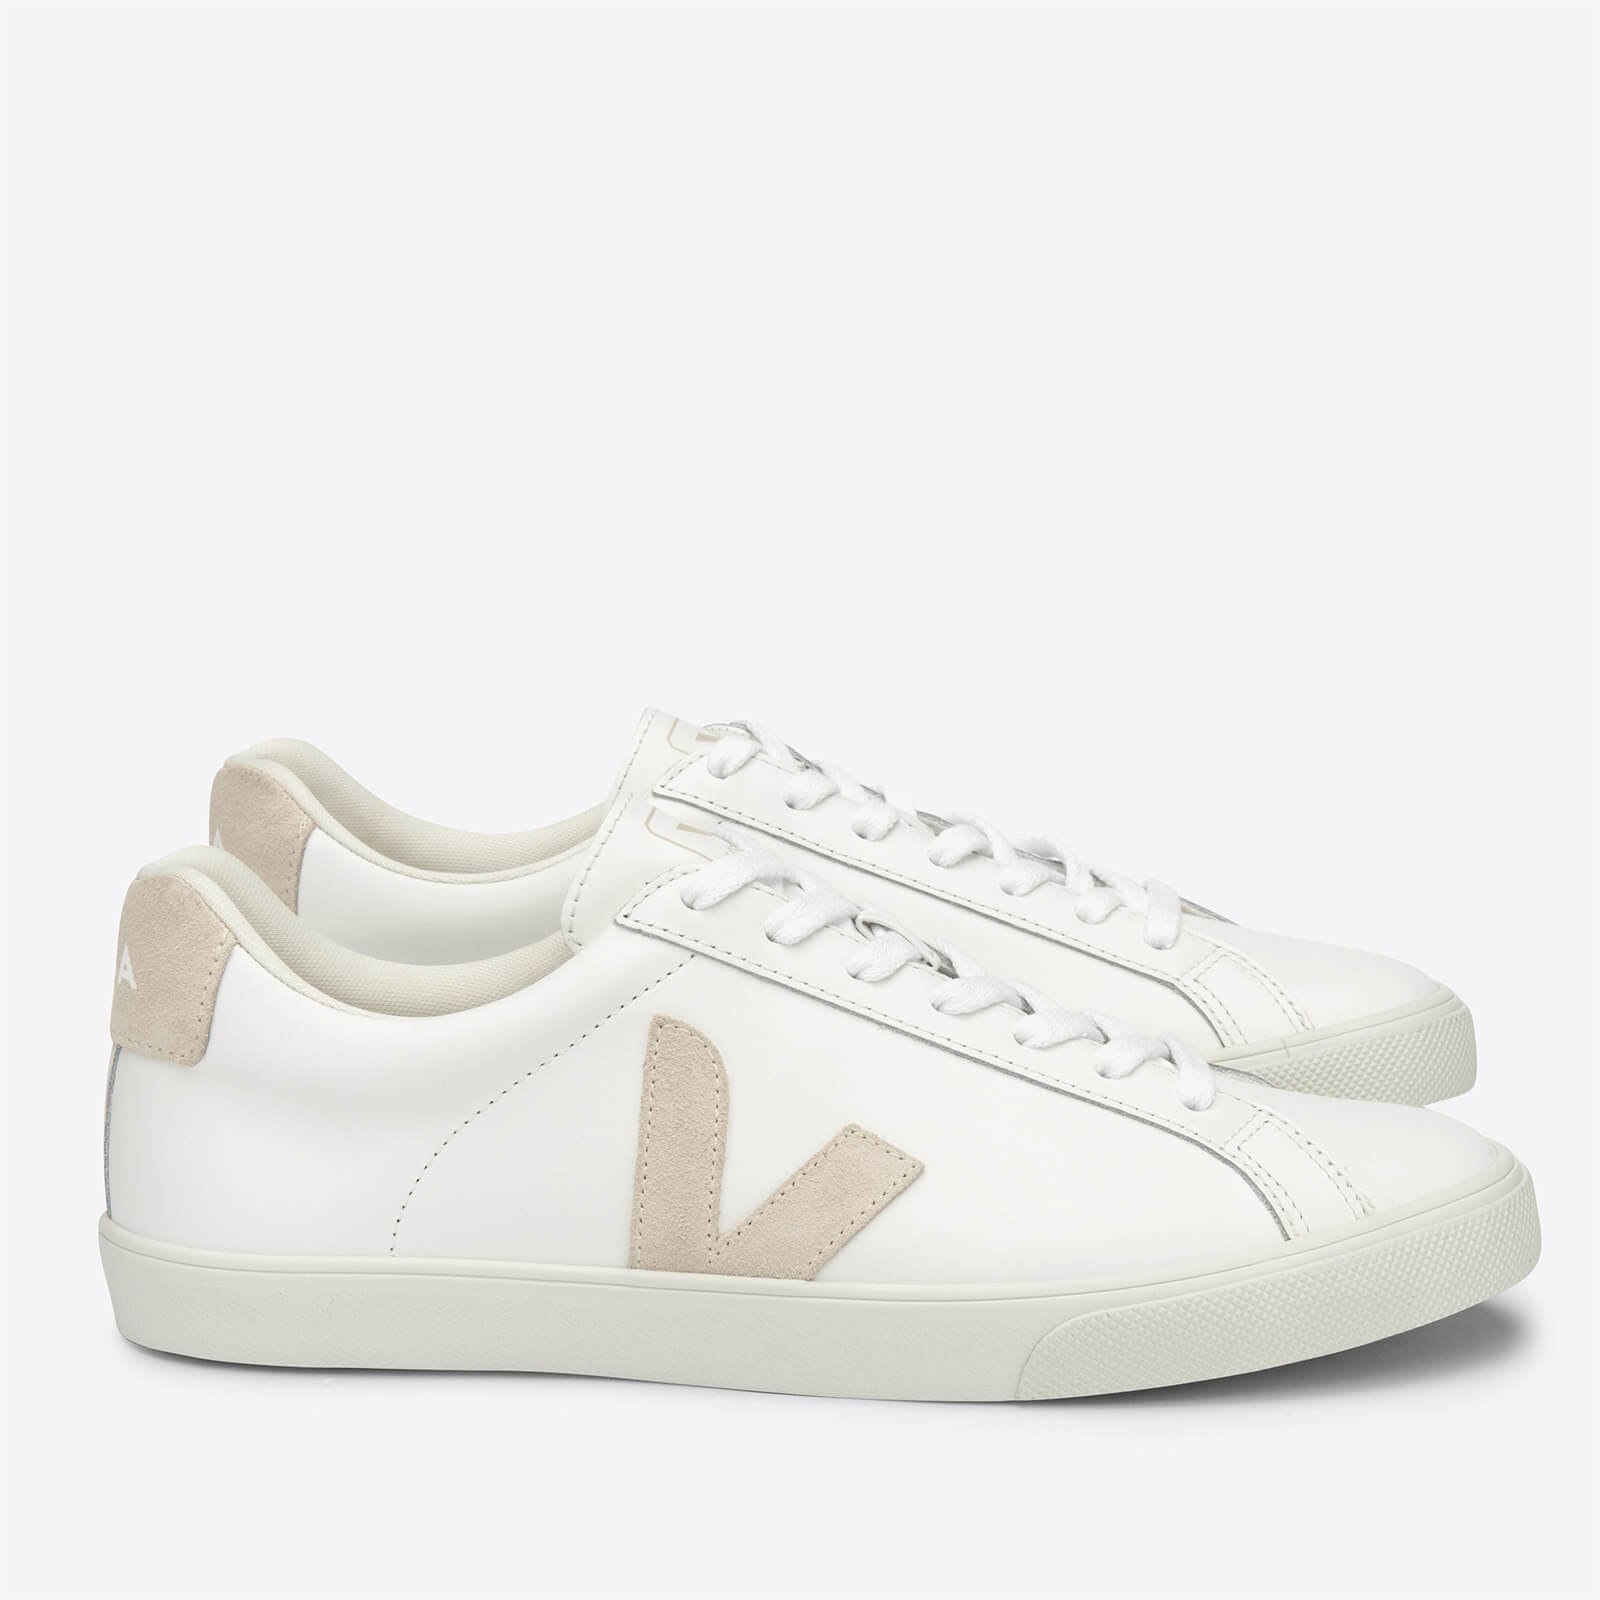 Veja Women's Esplar Leather Low Top Trainers - Extra White/Sable - UK 2